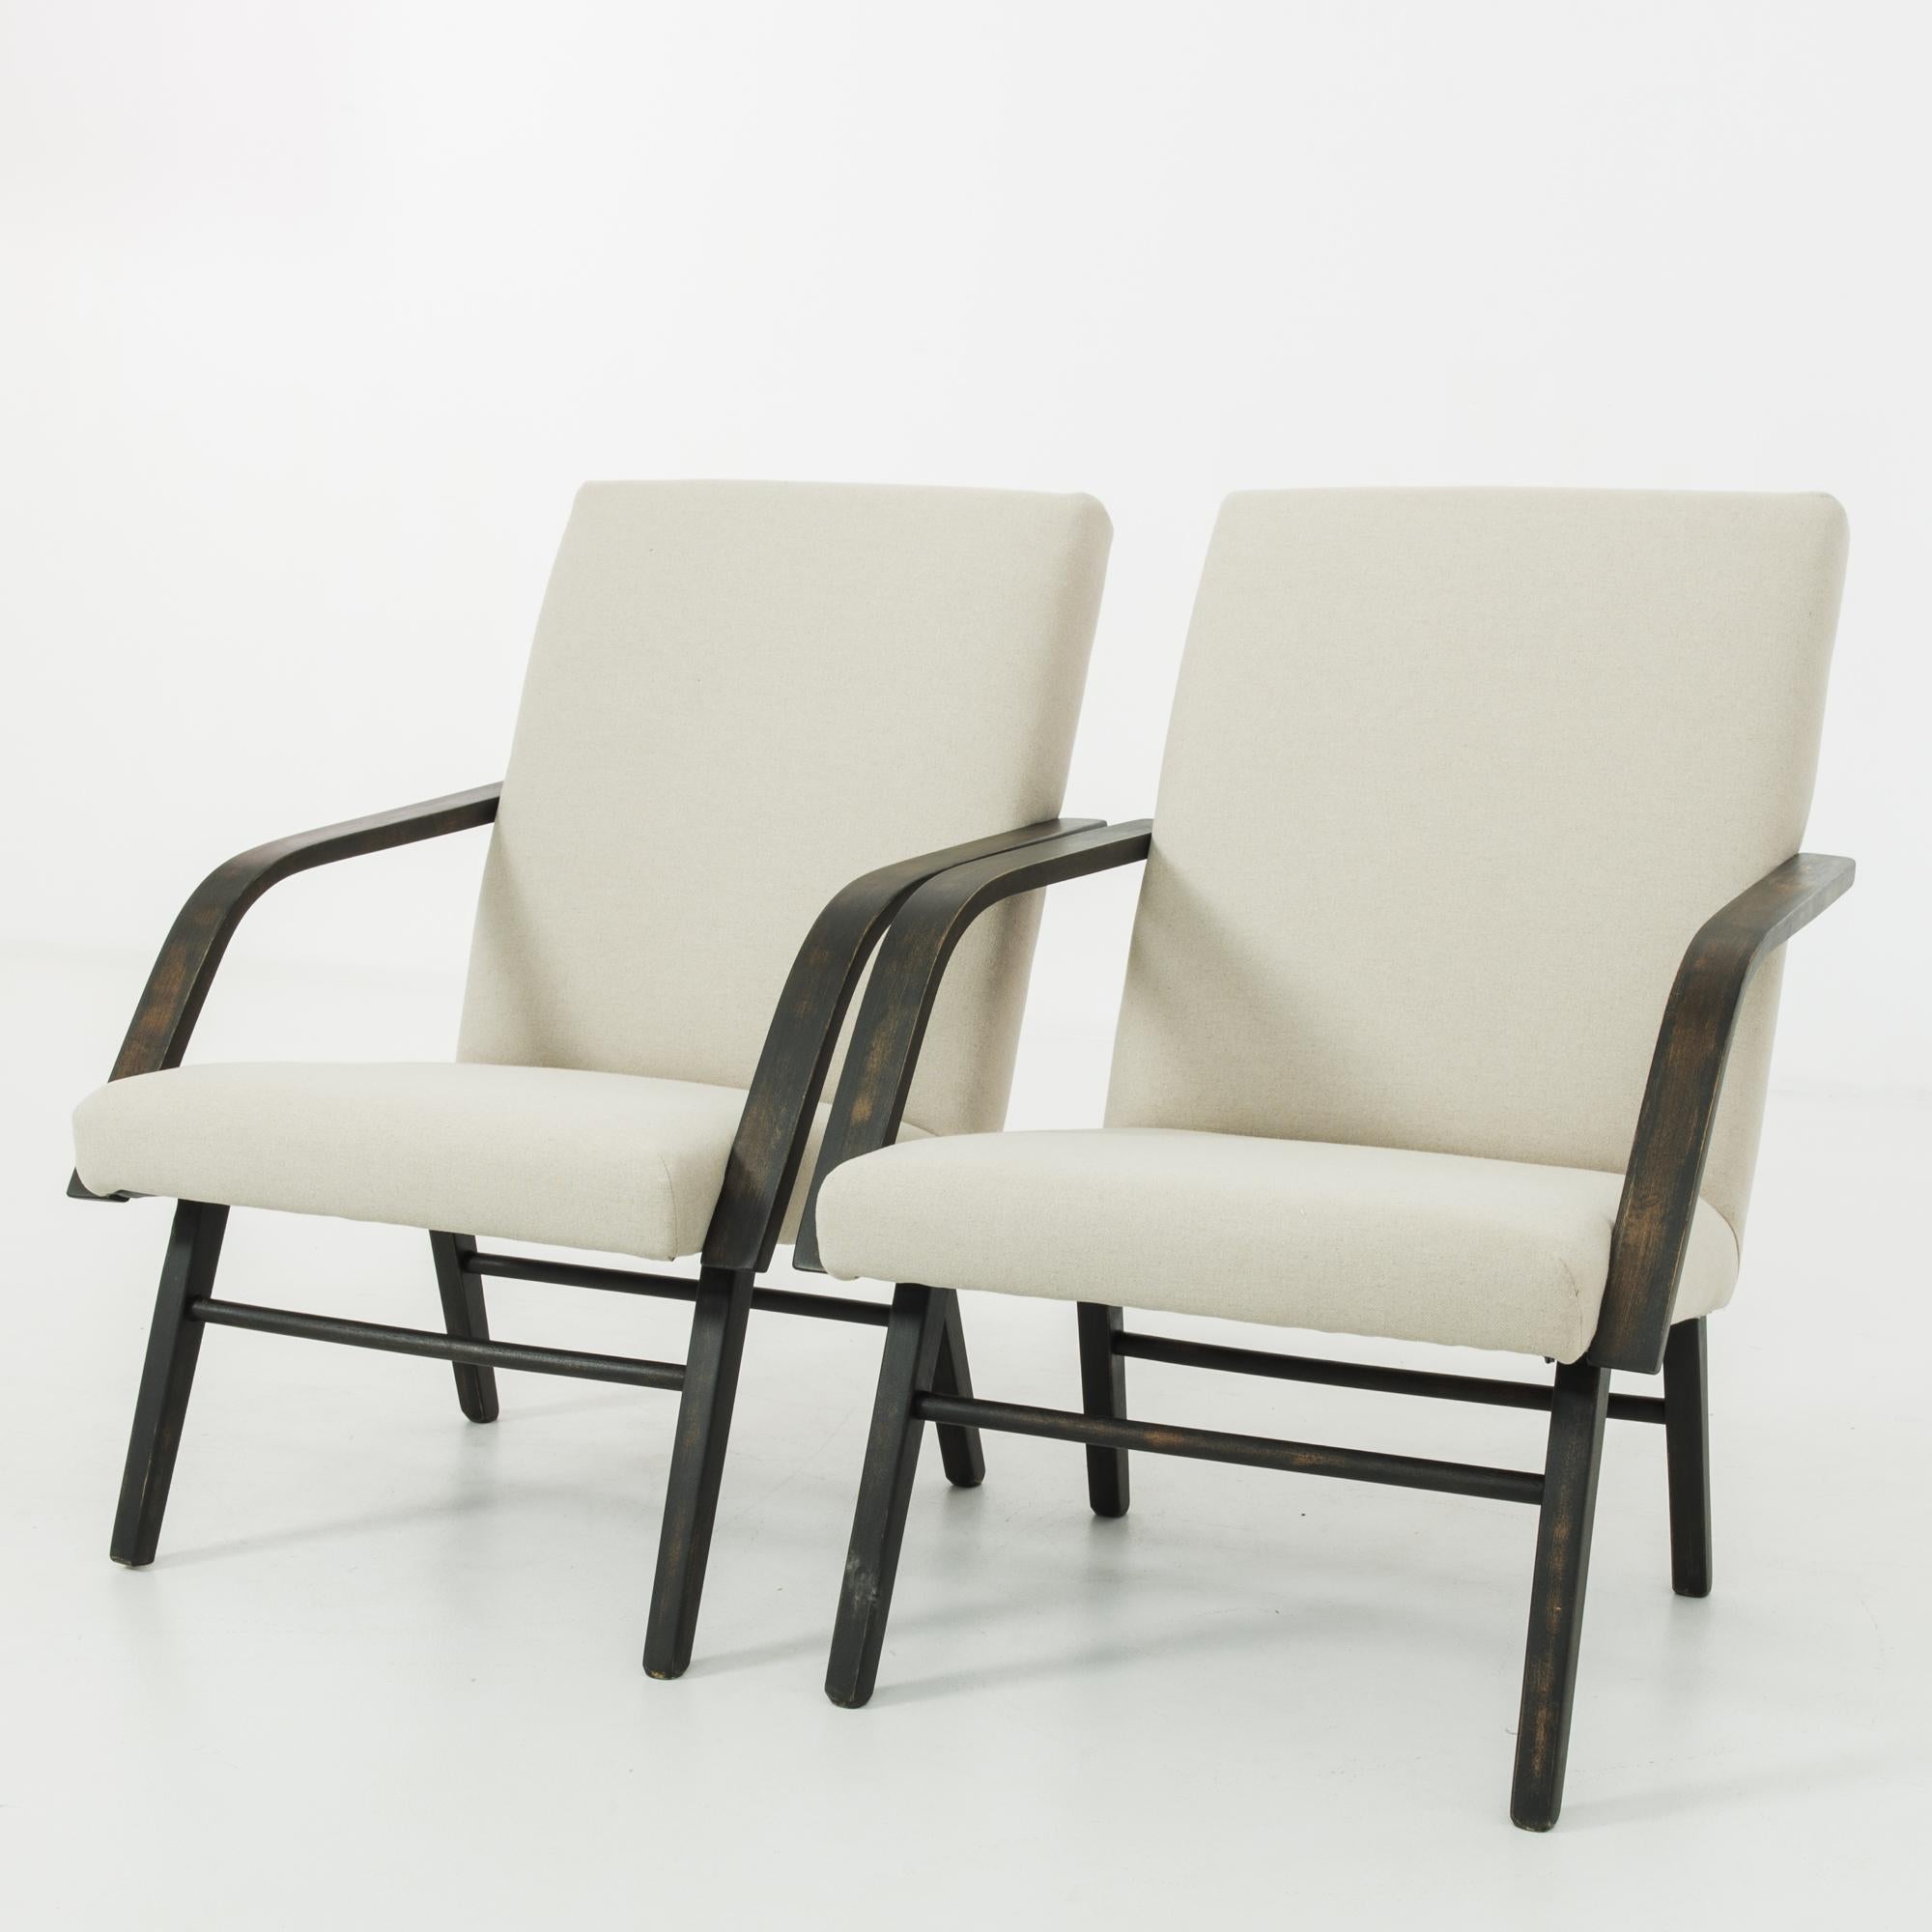 Mid-20th Century 1960s Czechoslovakian Angular Upholstered Lounge Chairs, a Pair For Sale